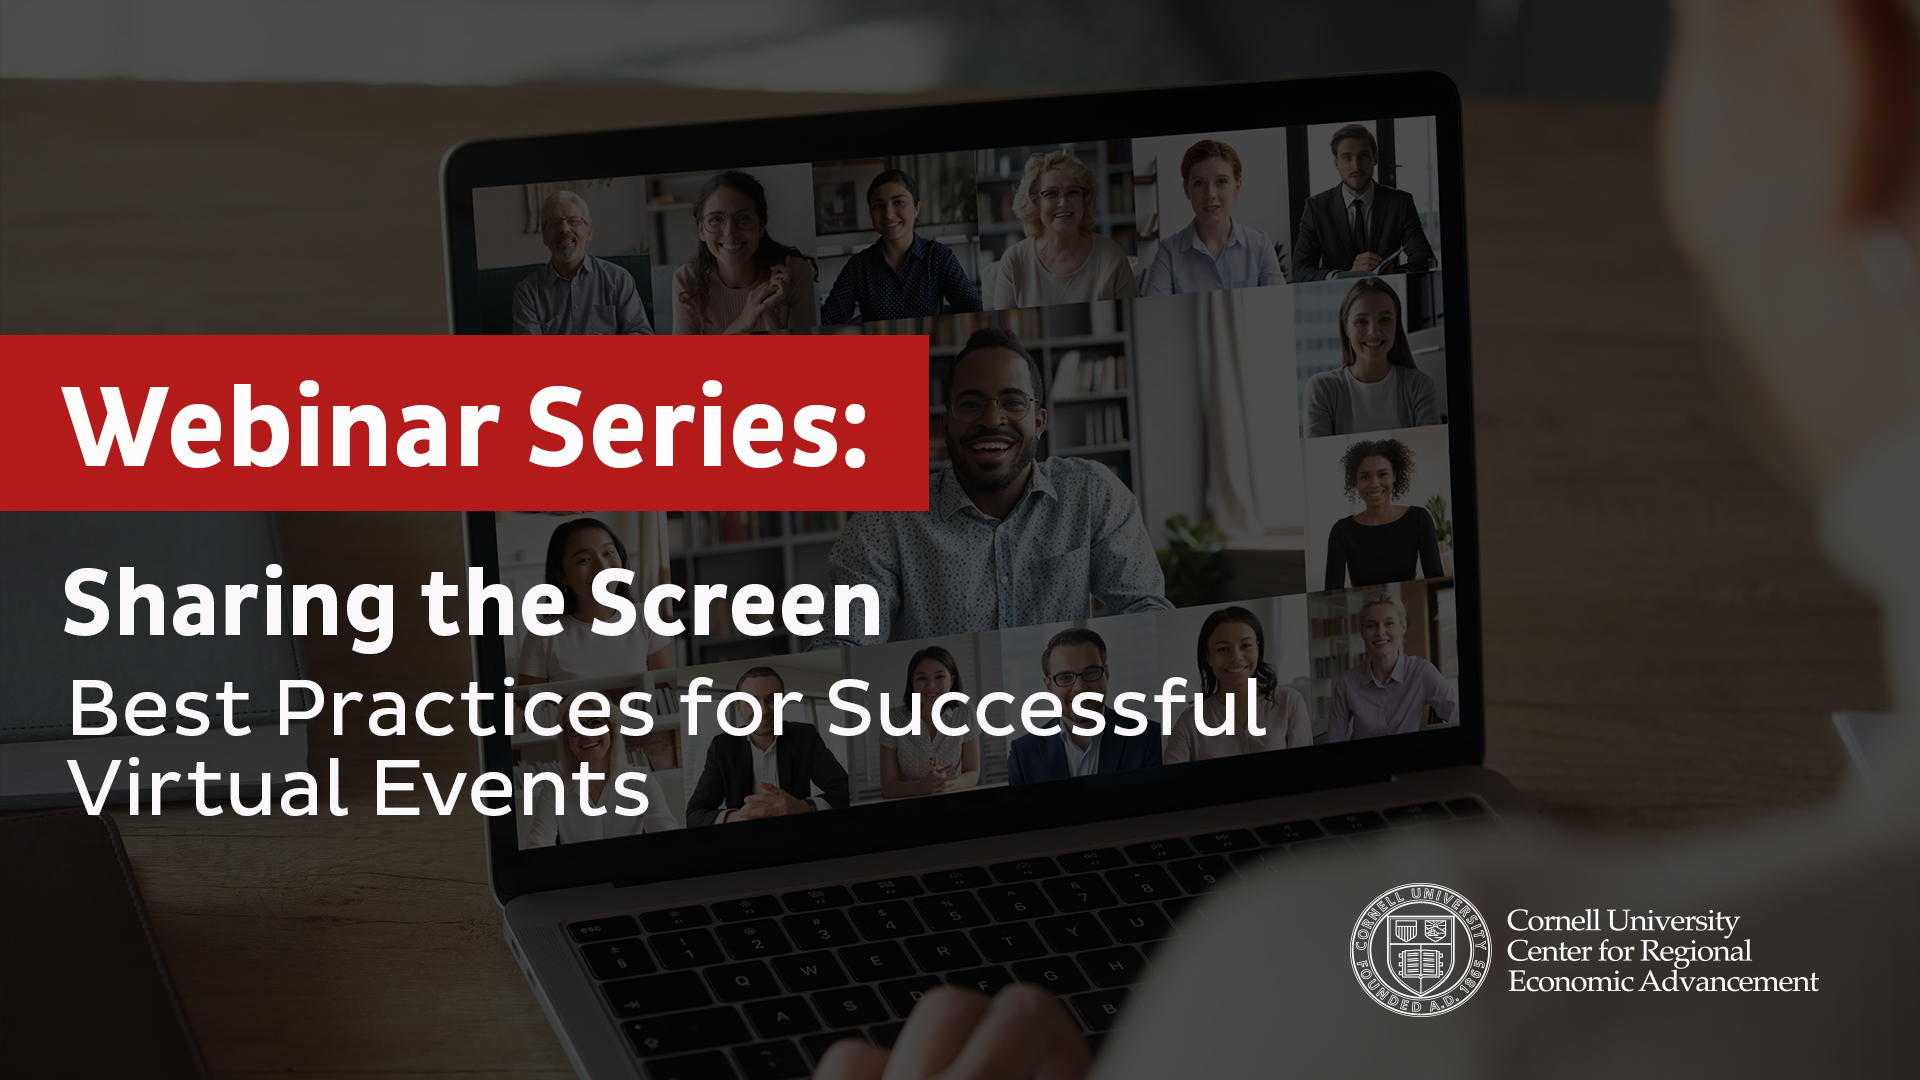 Webinar Series: Sharing the Screen, Best practices for successful virtual events